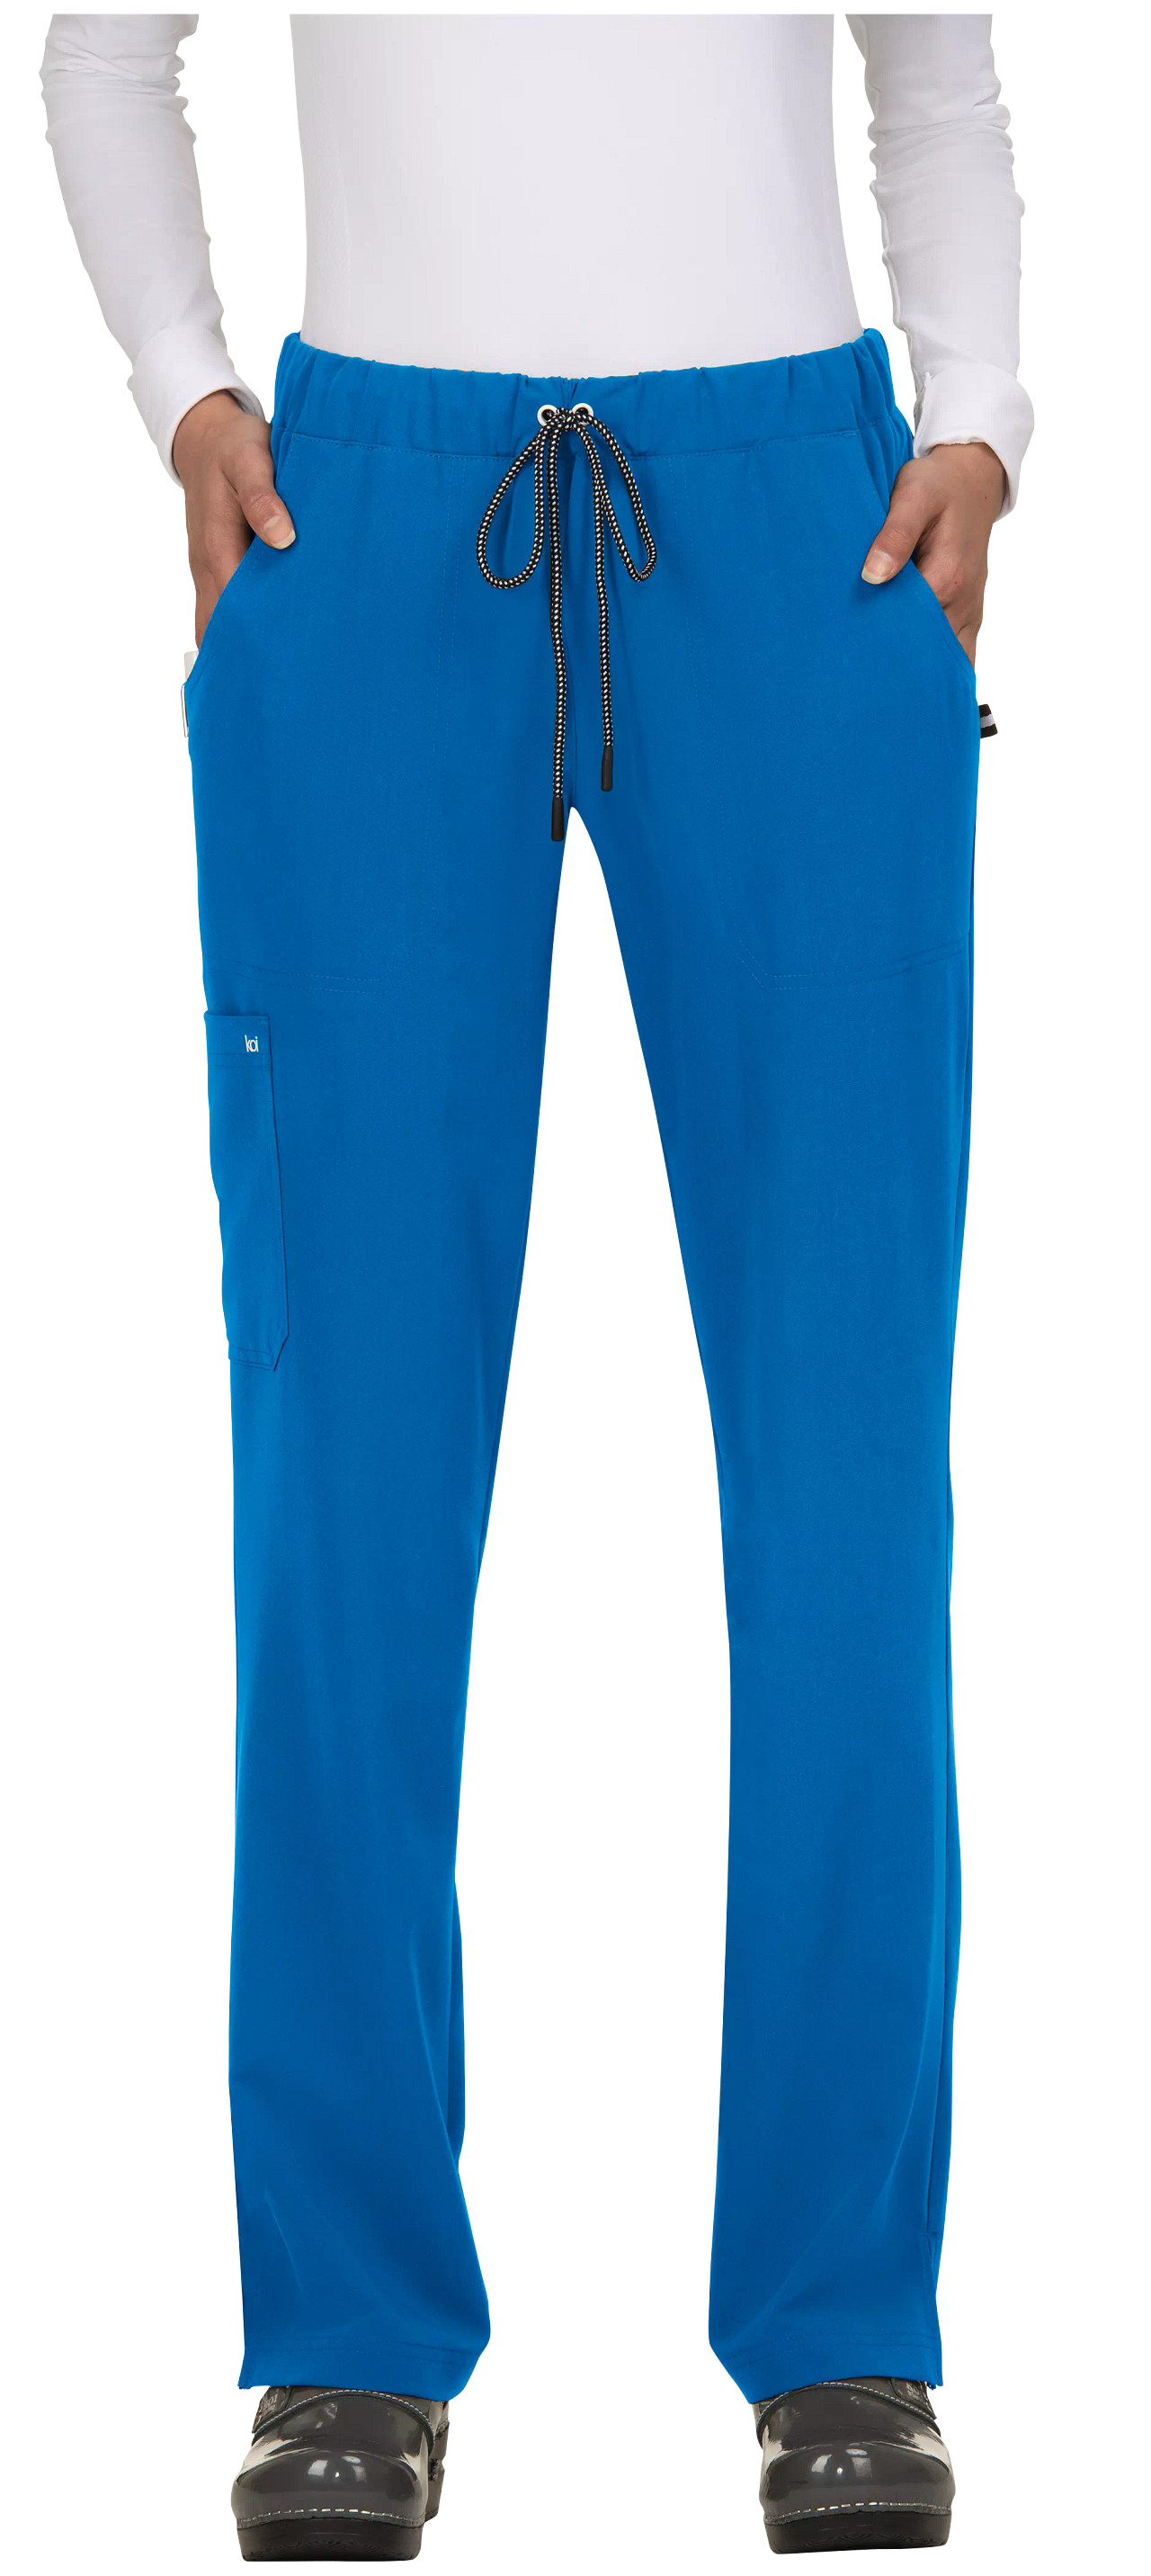 Koi Scrub Pant Next Gen Everyday Hero in Royal at Parker's Clothing & Shoes.